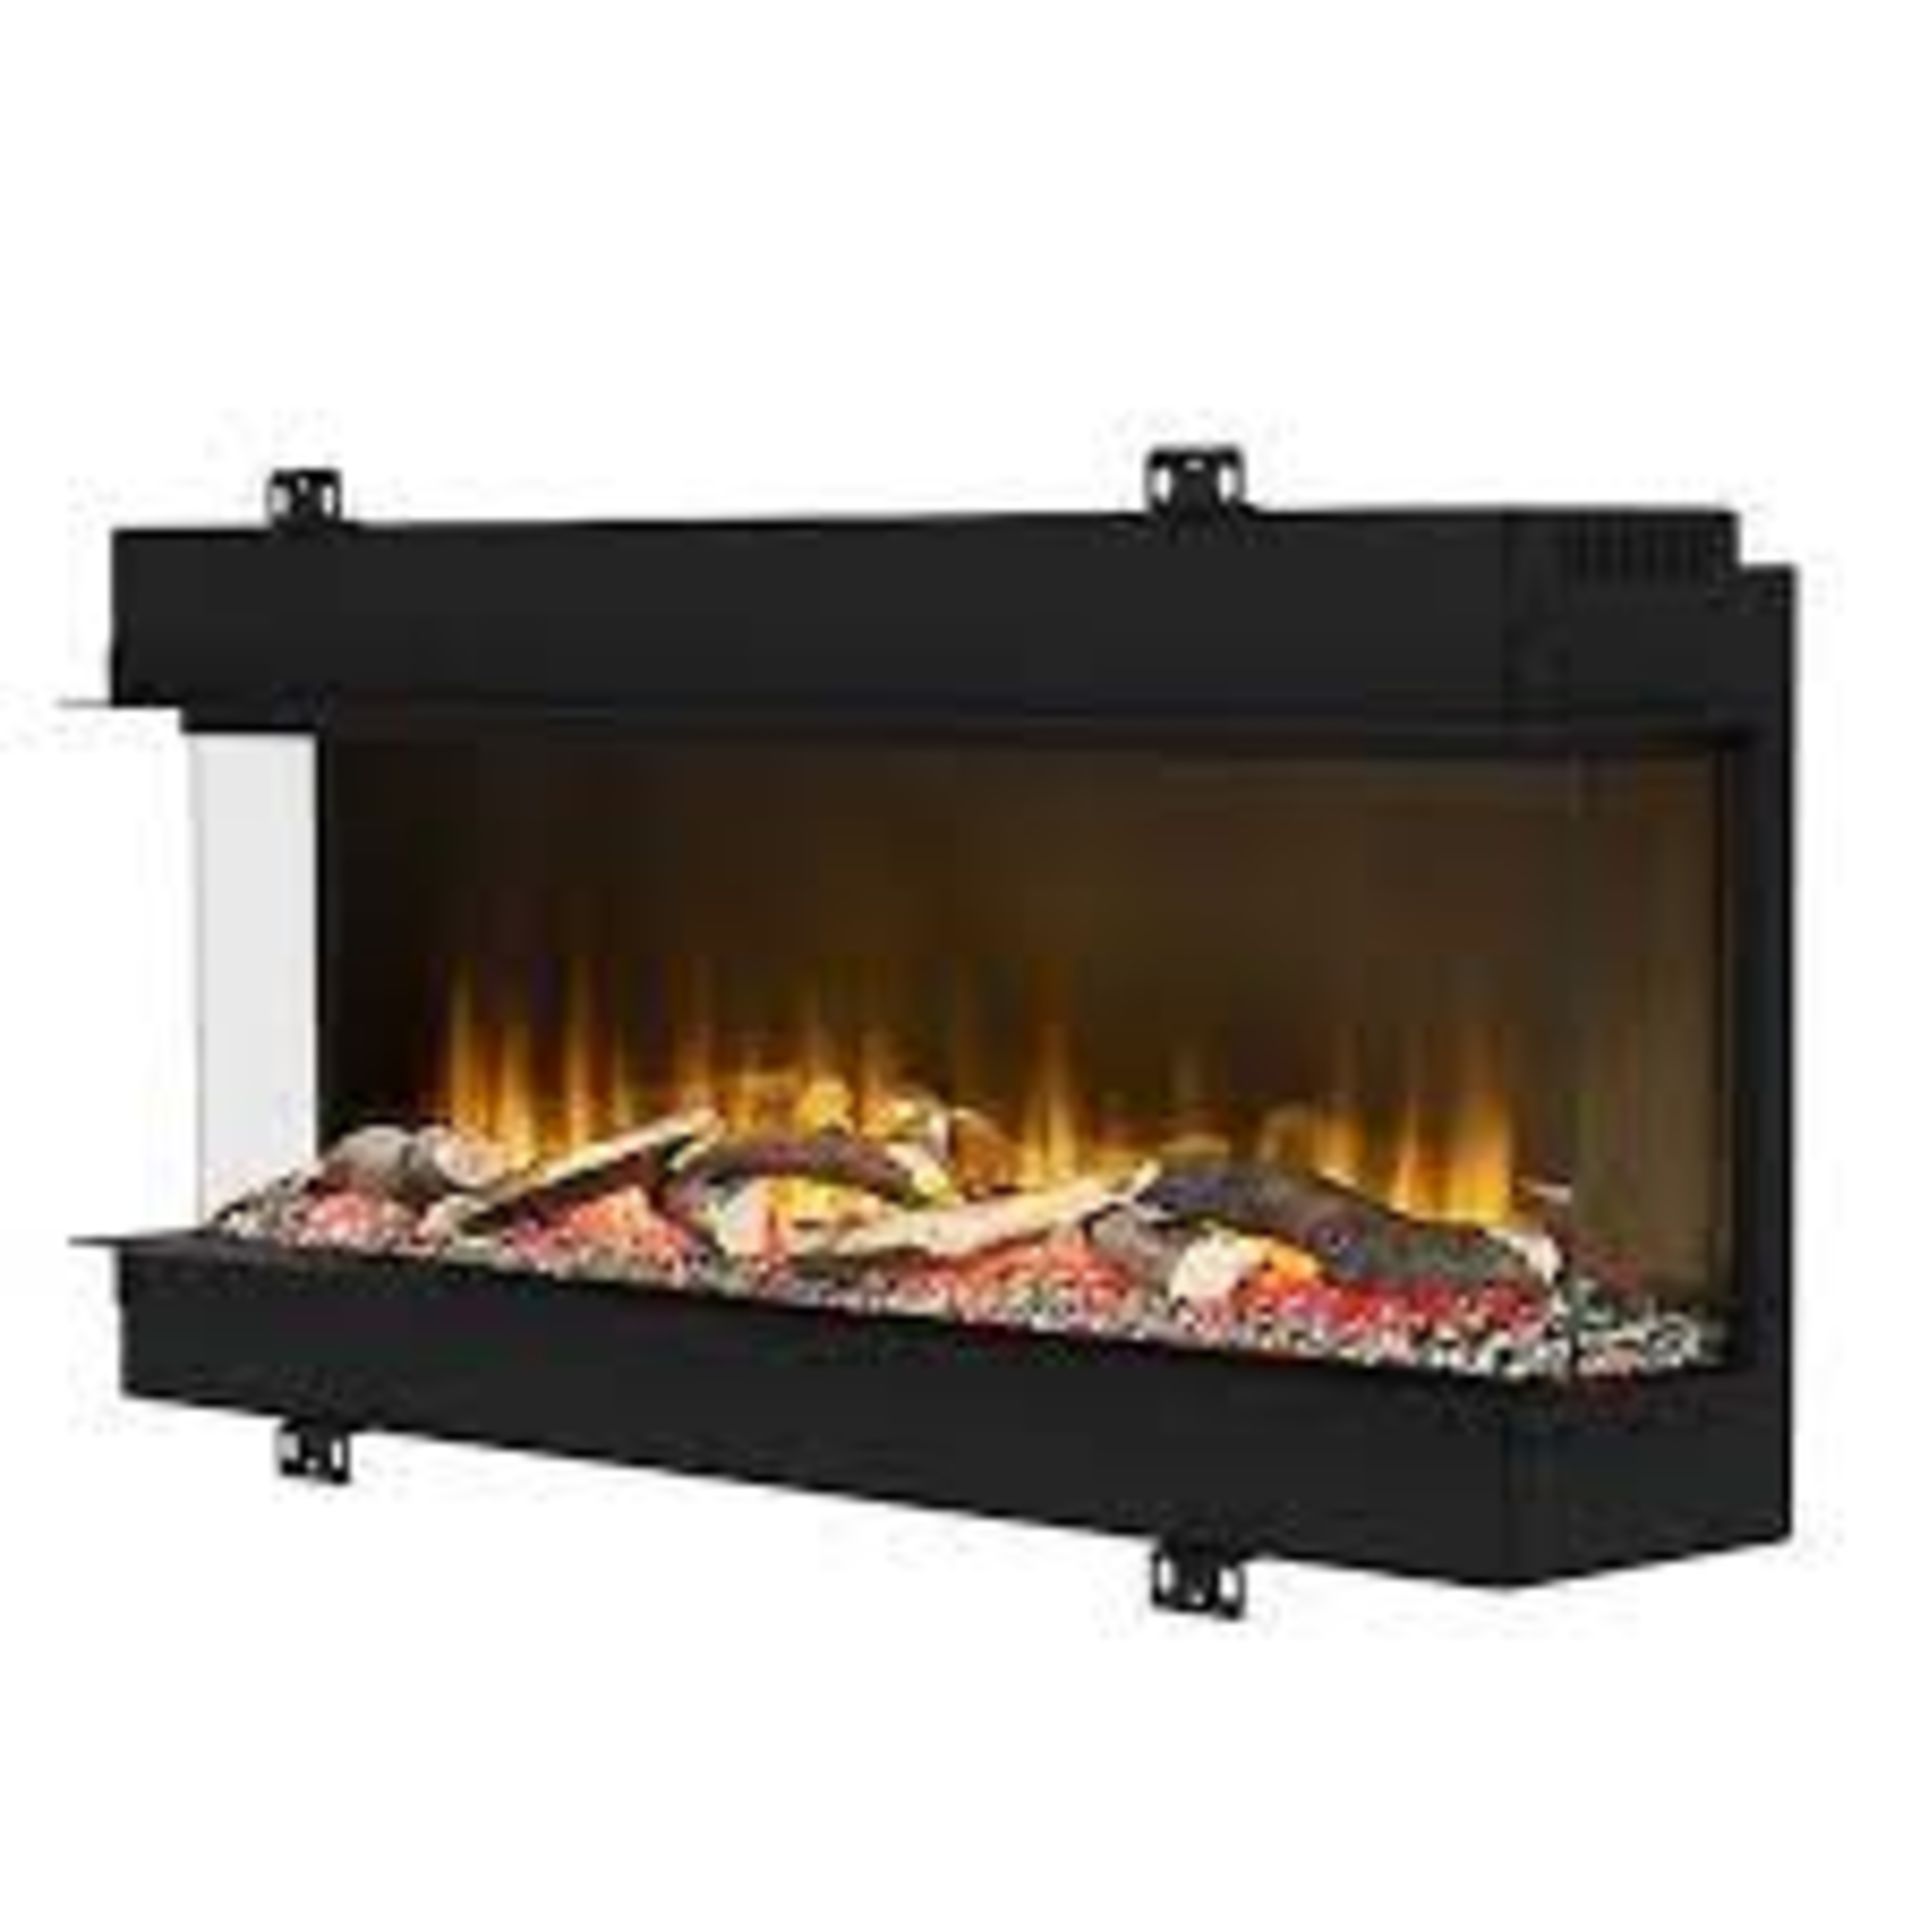 Be Modern Electric Fire Heater Wall Mounted Slimline Black Glass Flame Remote Control 2kW